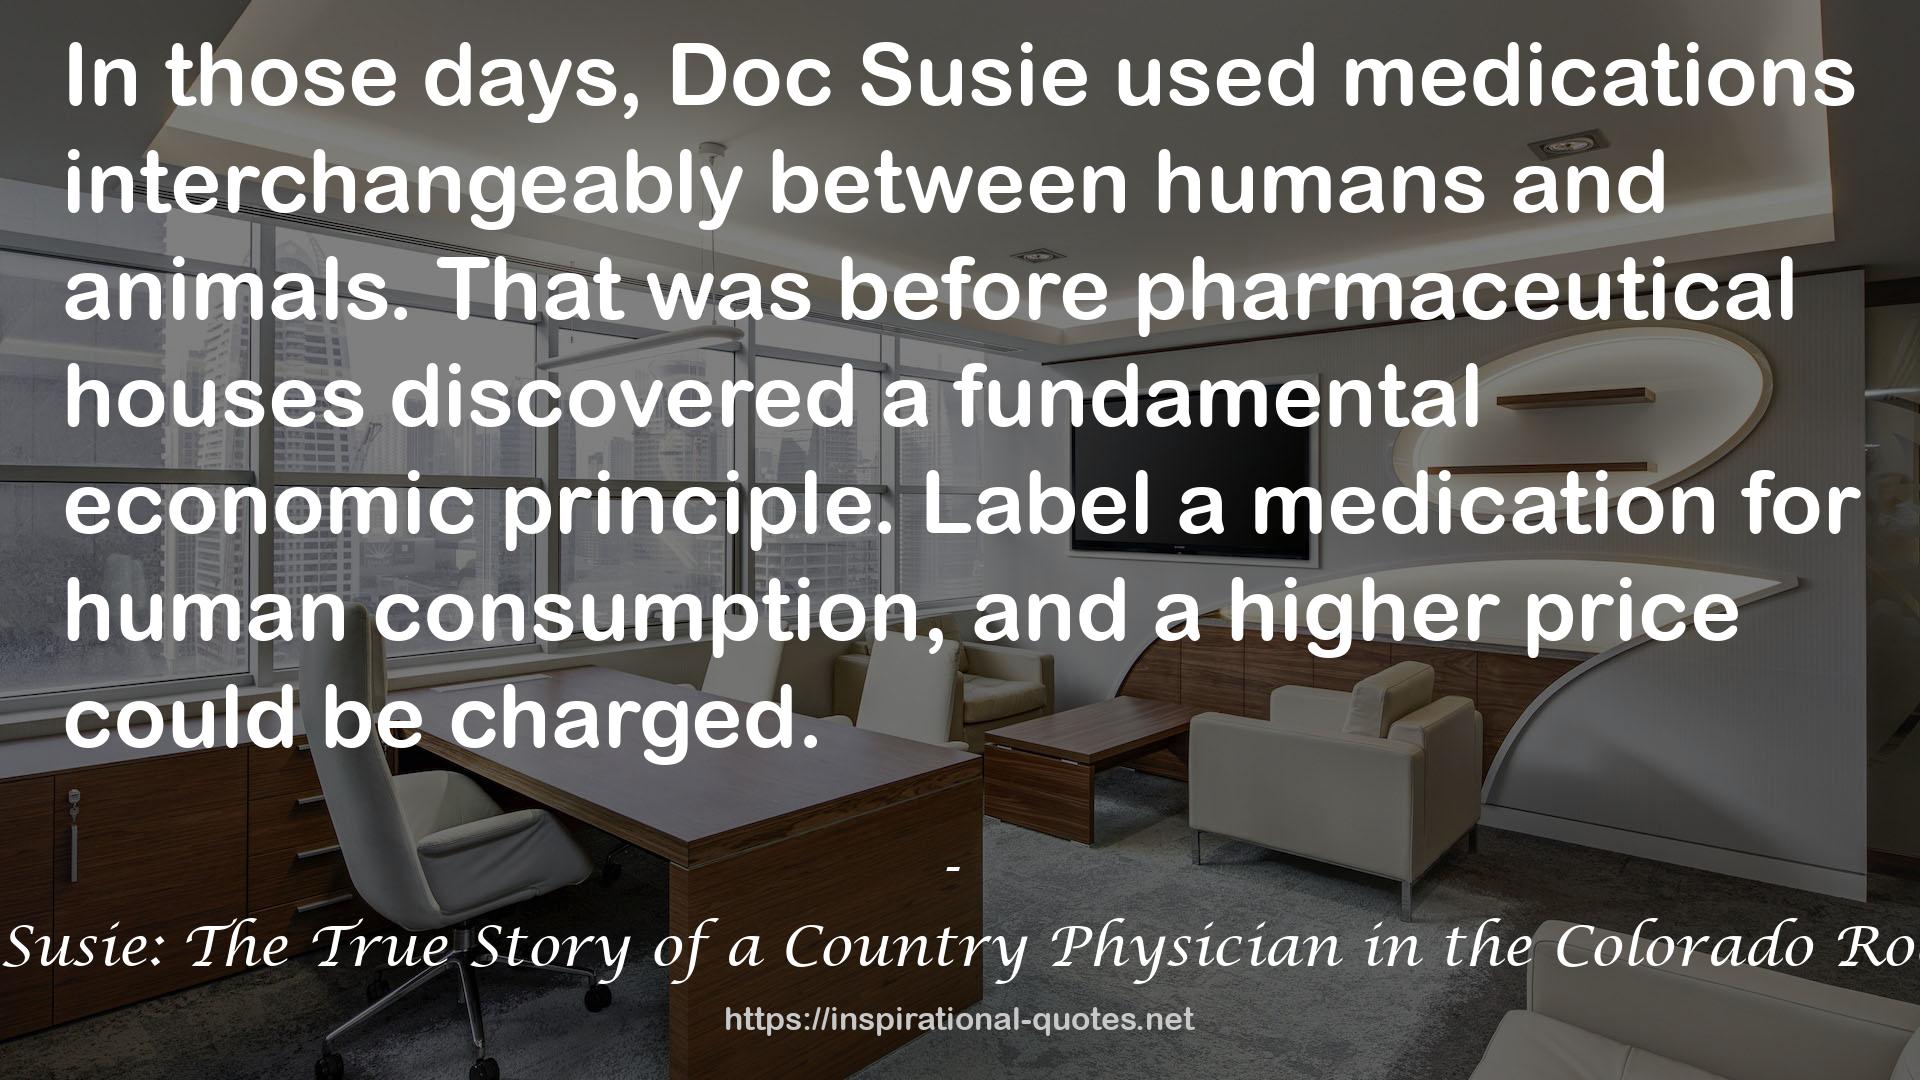 Doc Susie: The True Story of a Country Physician in the Colorado Rockies QUOTES